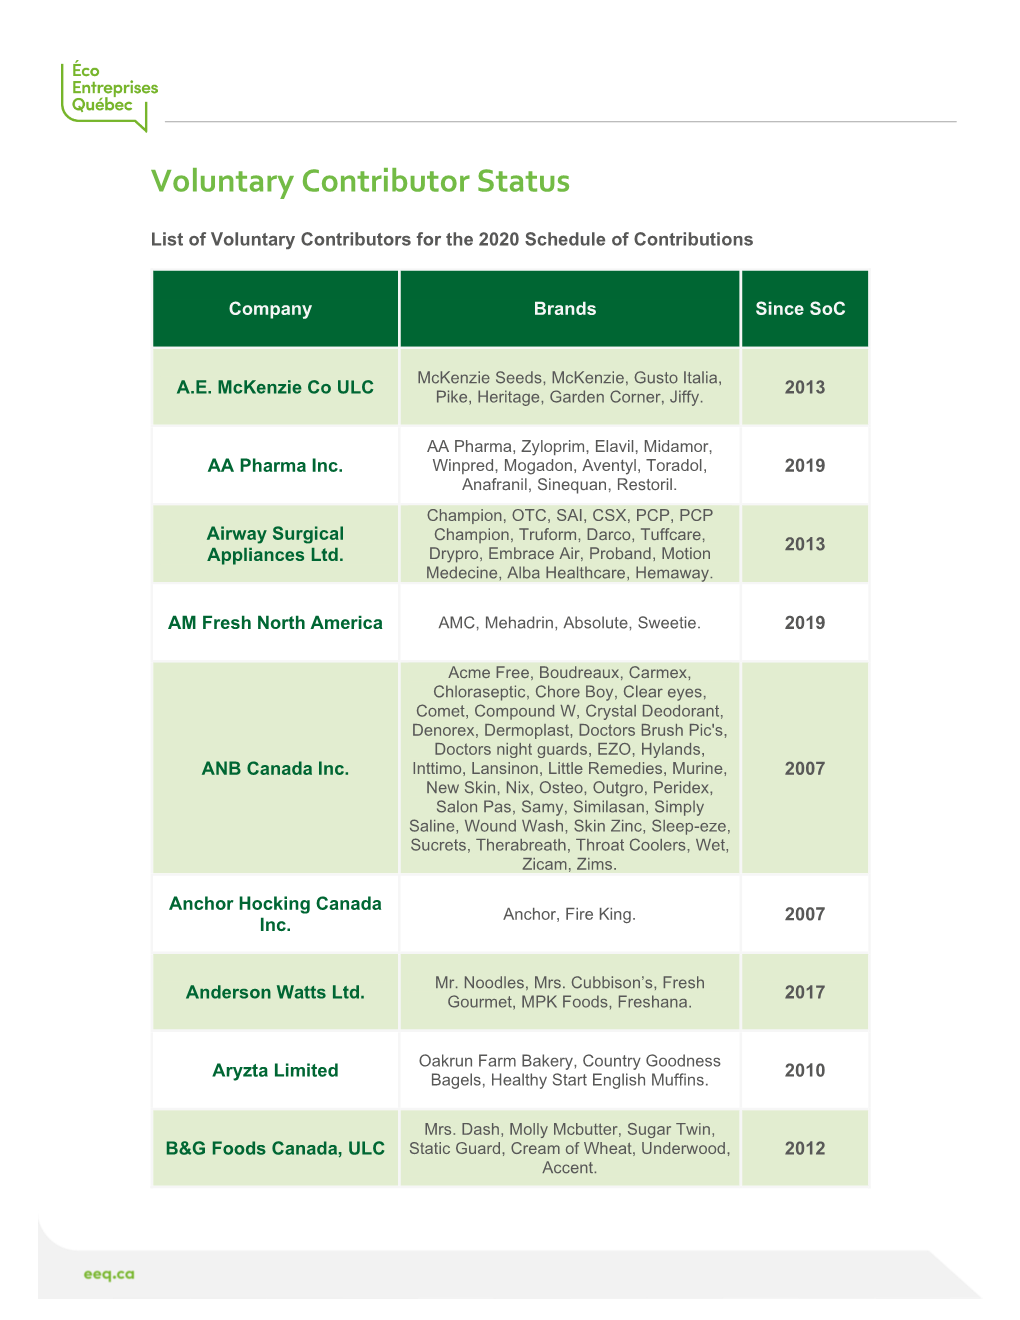 List of Voluntary Contributors for the 2020 Schedule of Contributions